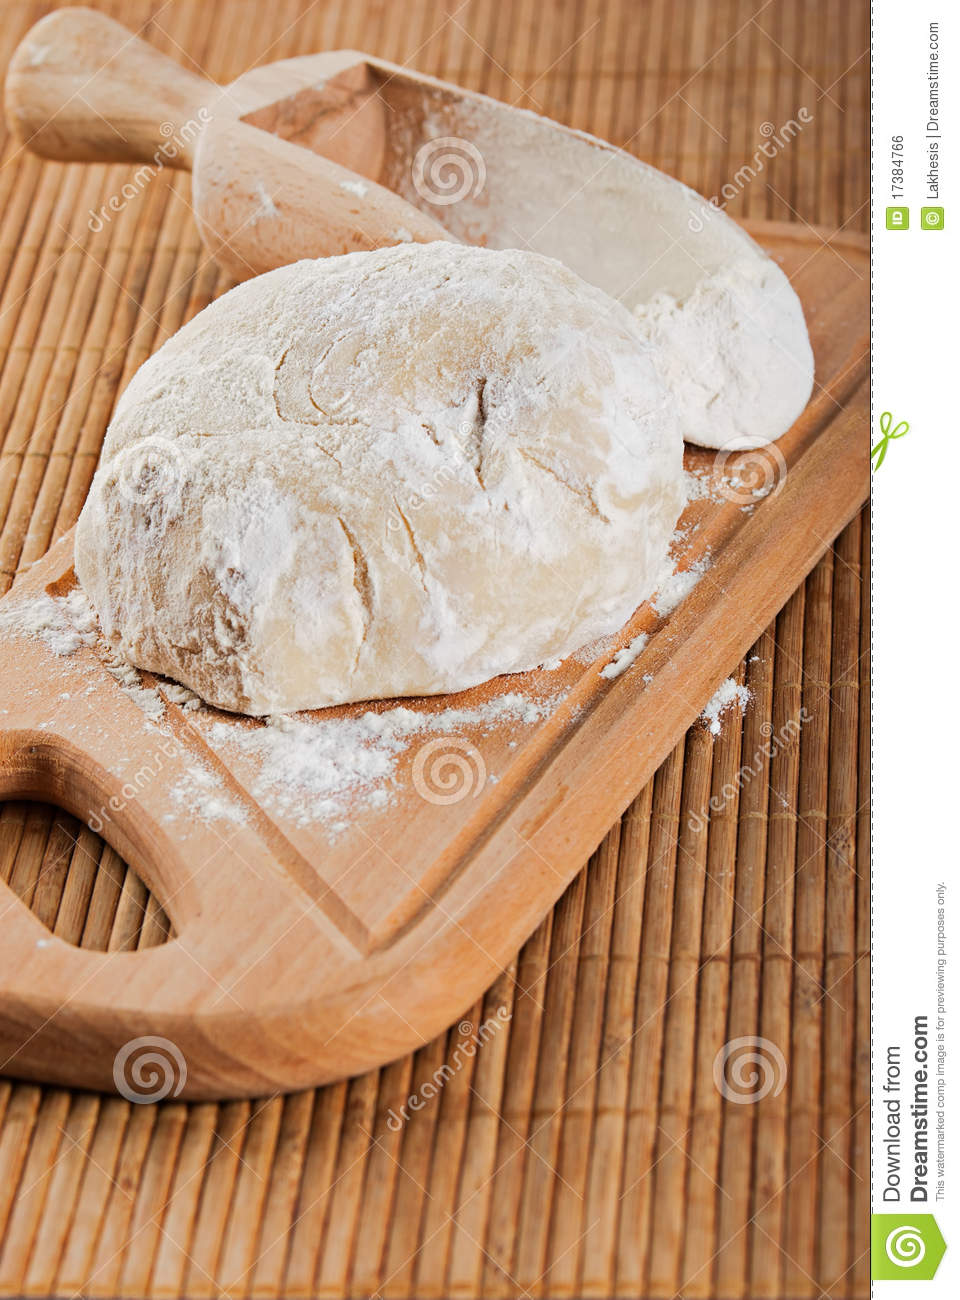 Dough For Making Bread Royalty Free Stock Image   Image  17384766